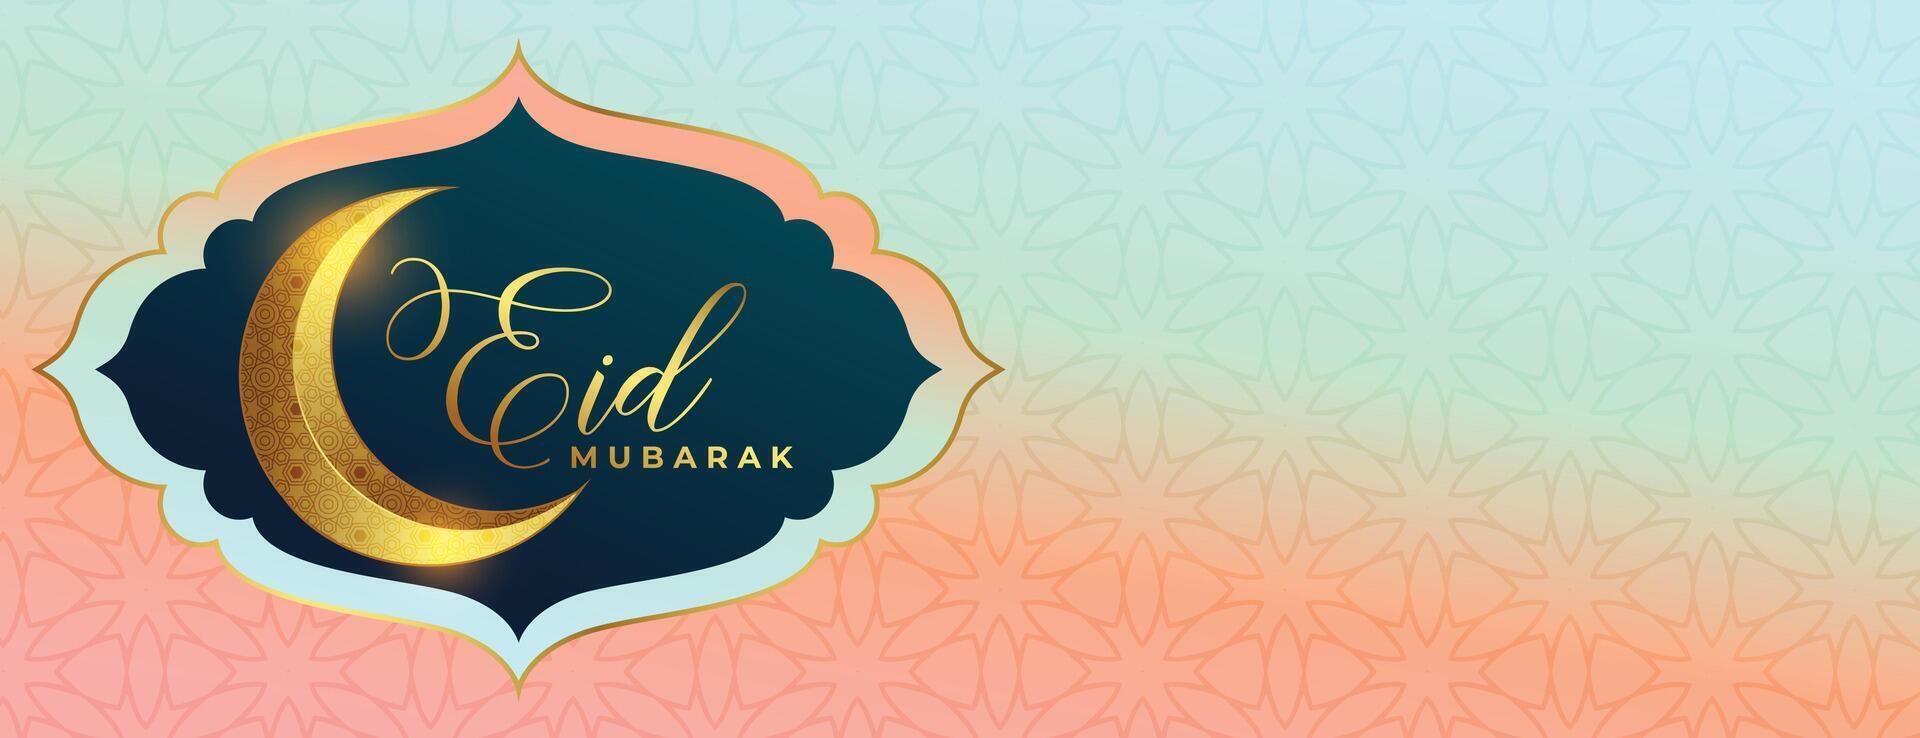 3d style golden crescent eid mubarak wishes poster for your celebration vector